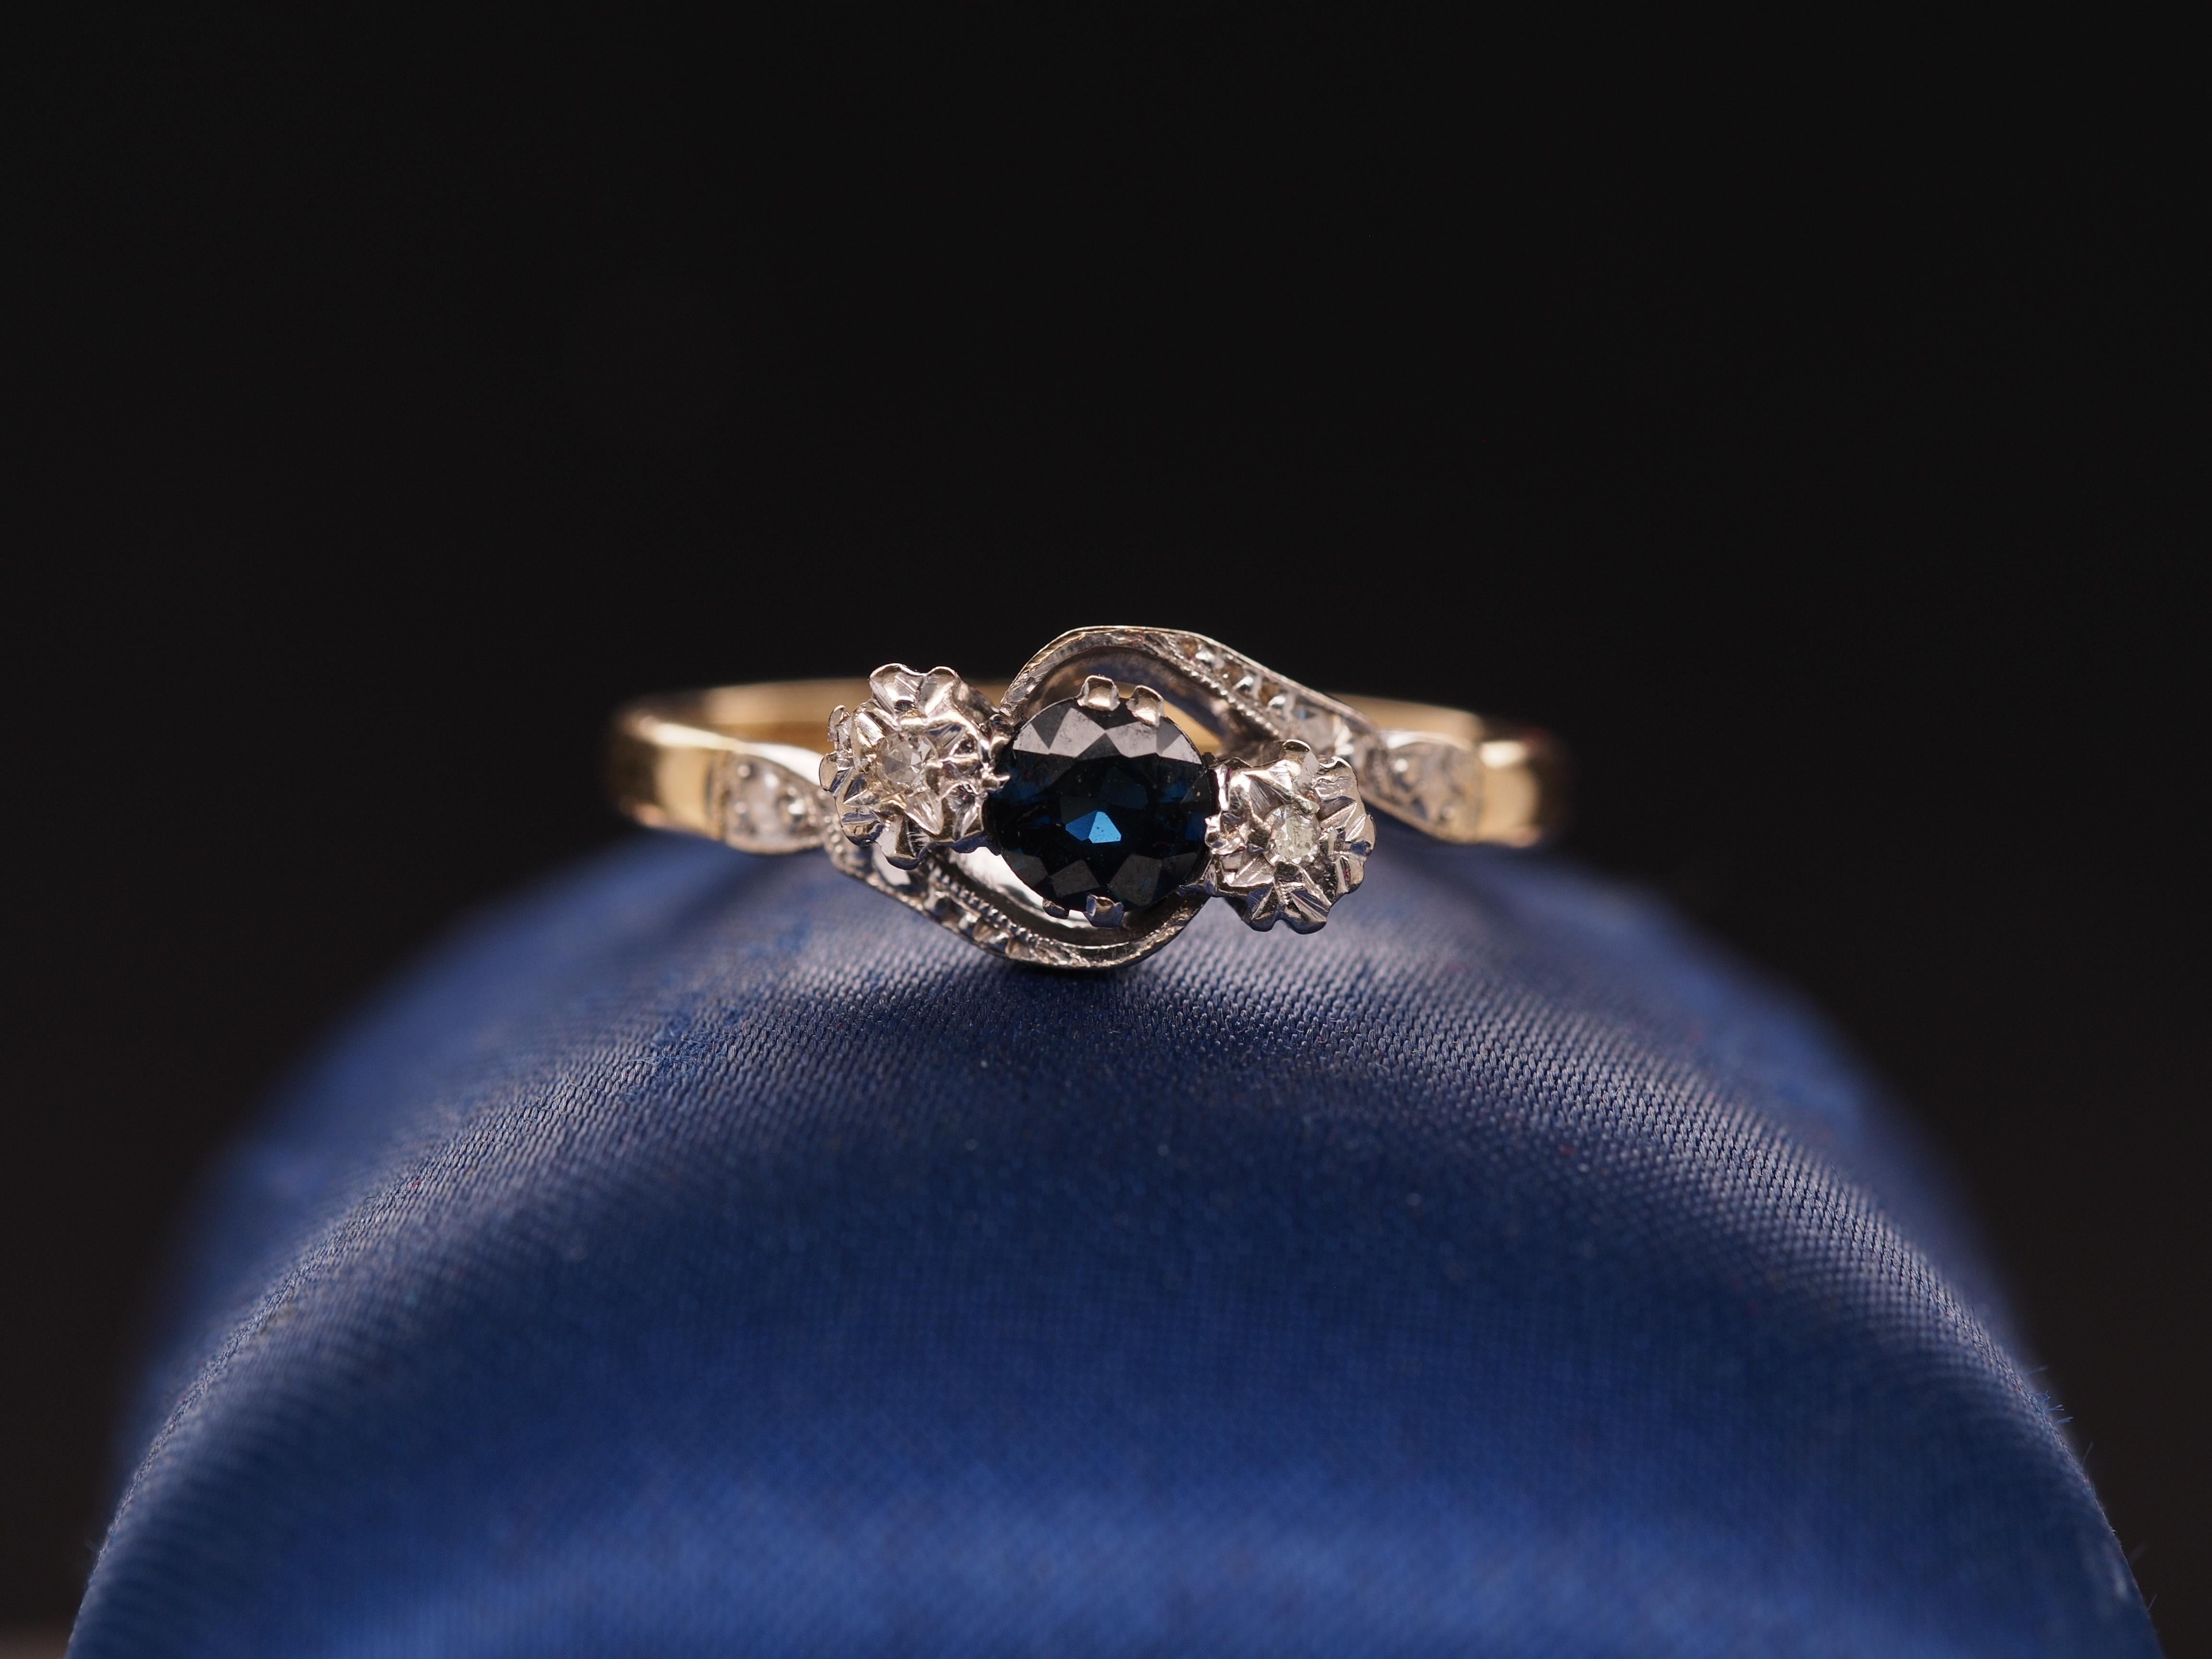 Item Details:
Ring Size: 7.5
Metal Type: 18k Yellow Gold [Hallmarked, and Tested]
Weight: 3.5 grams
Center Stone: Sapphire, Natural, .35ct, Blue
Diamond Details: .10ct, total. G-H Color, VS Clarity
Band Width: 2.0mm
Condition: Excellent